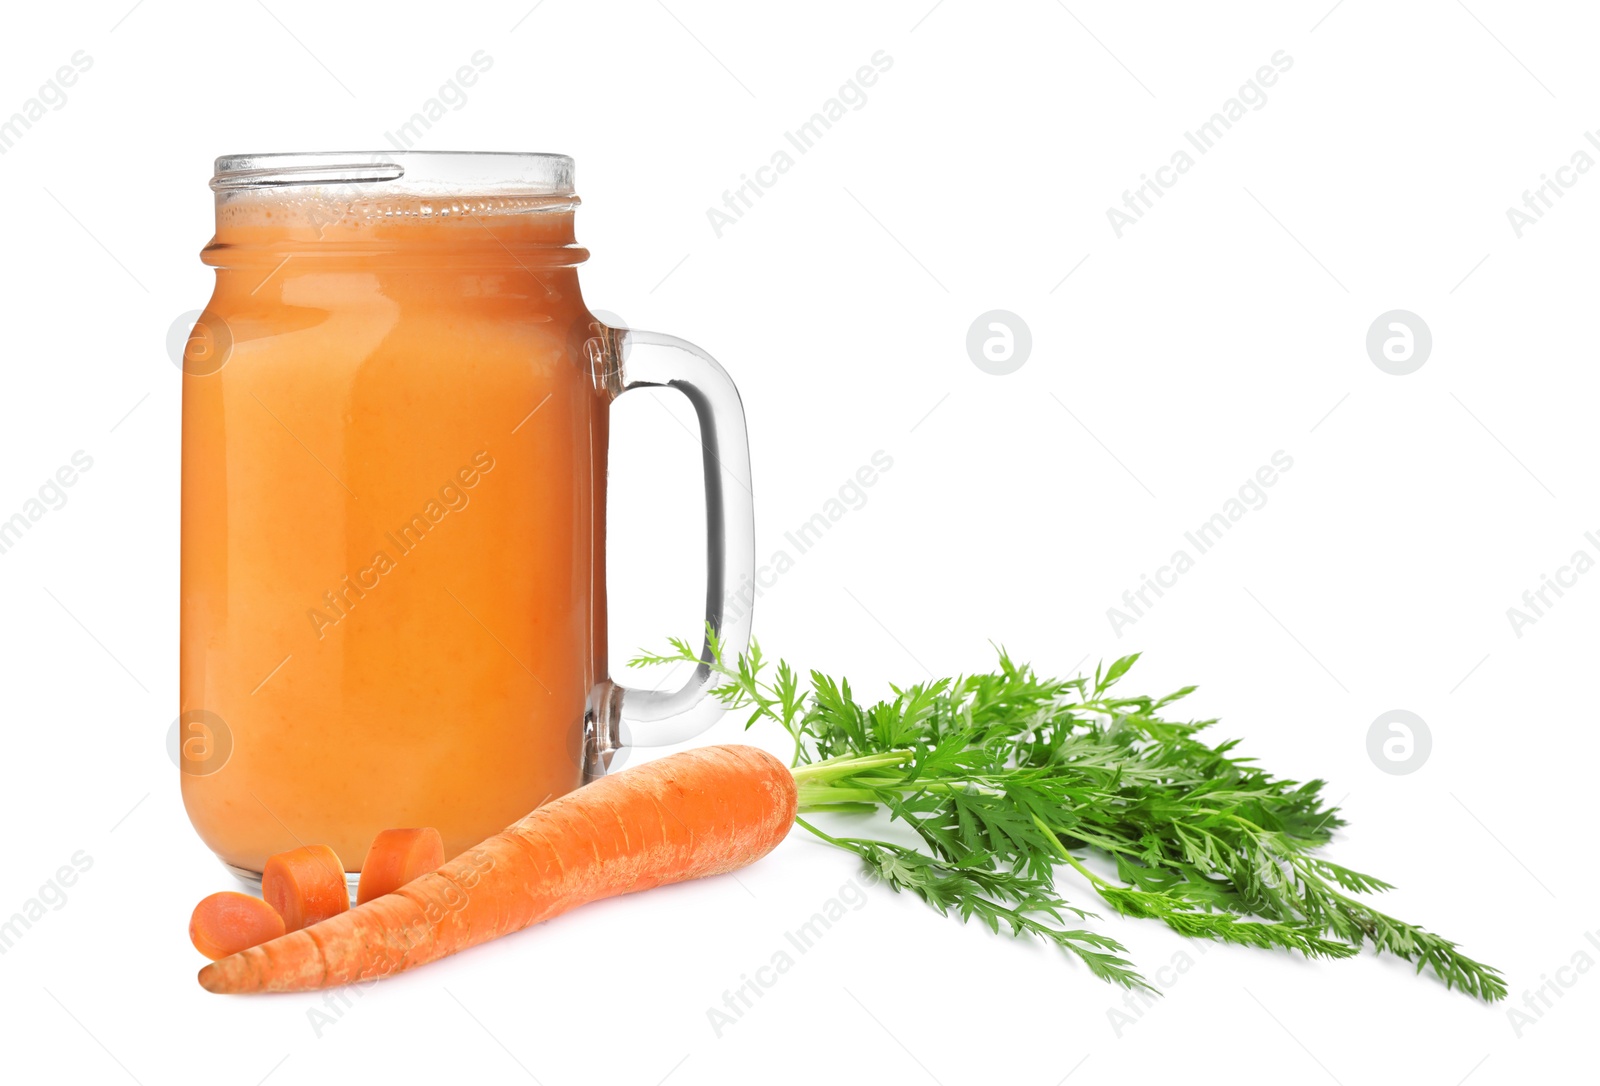 Image of Carrots and glass of fresh juice on white background